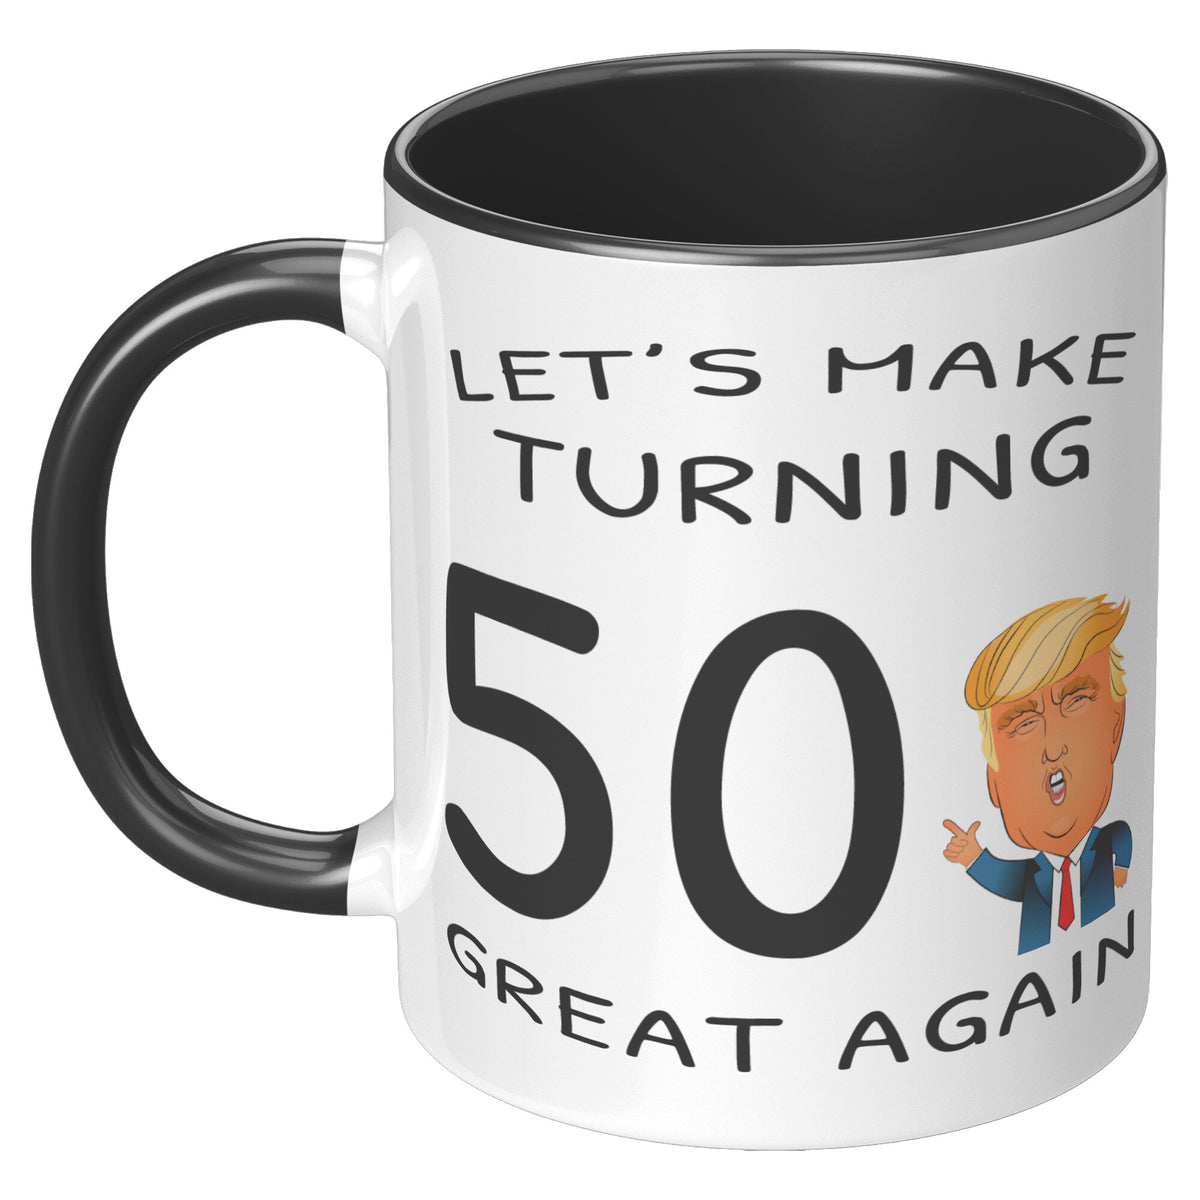 50 Birthday Gift - Let's Make Turning 50 Great Again Accent Coffee Mug 11oz